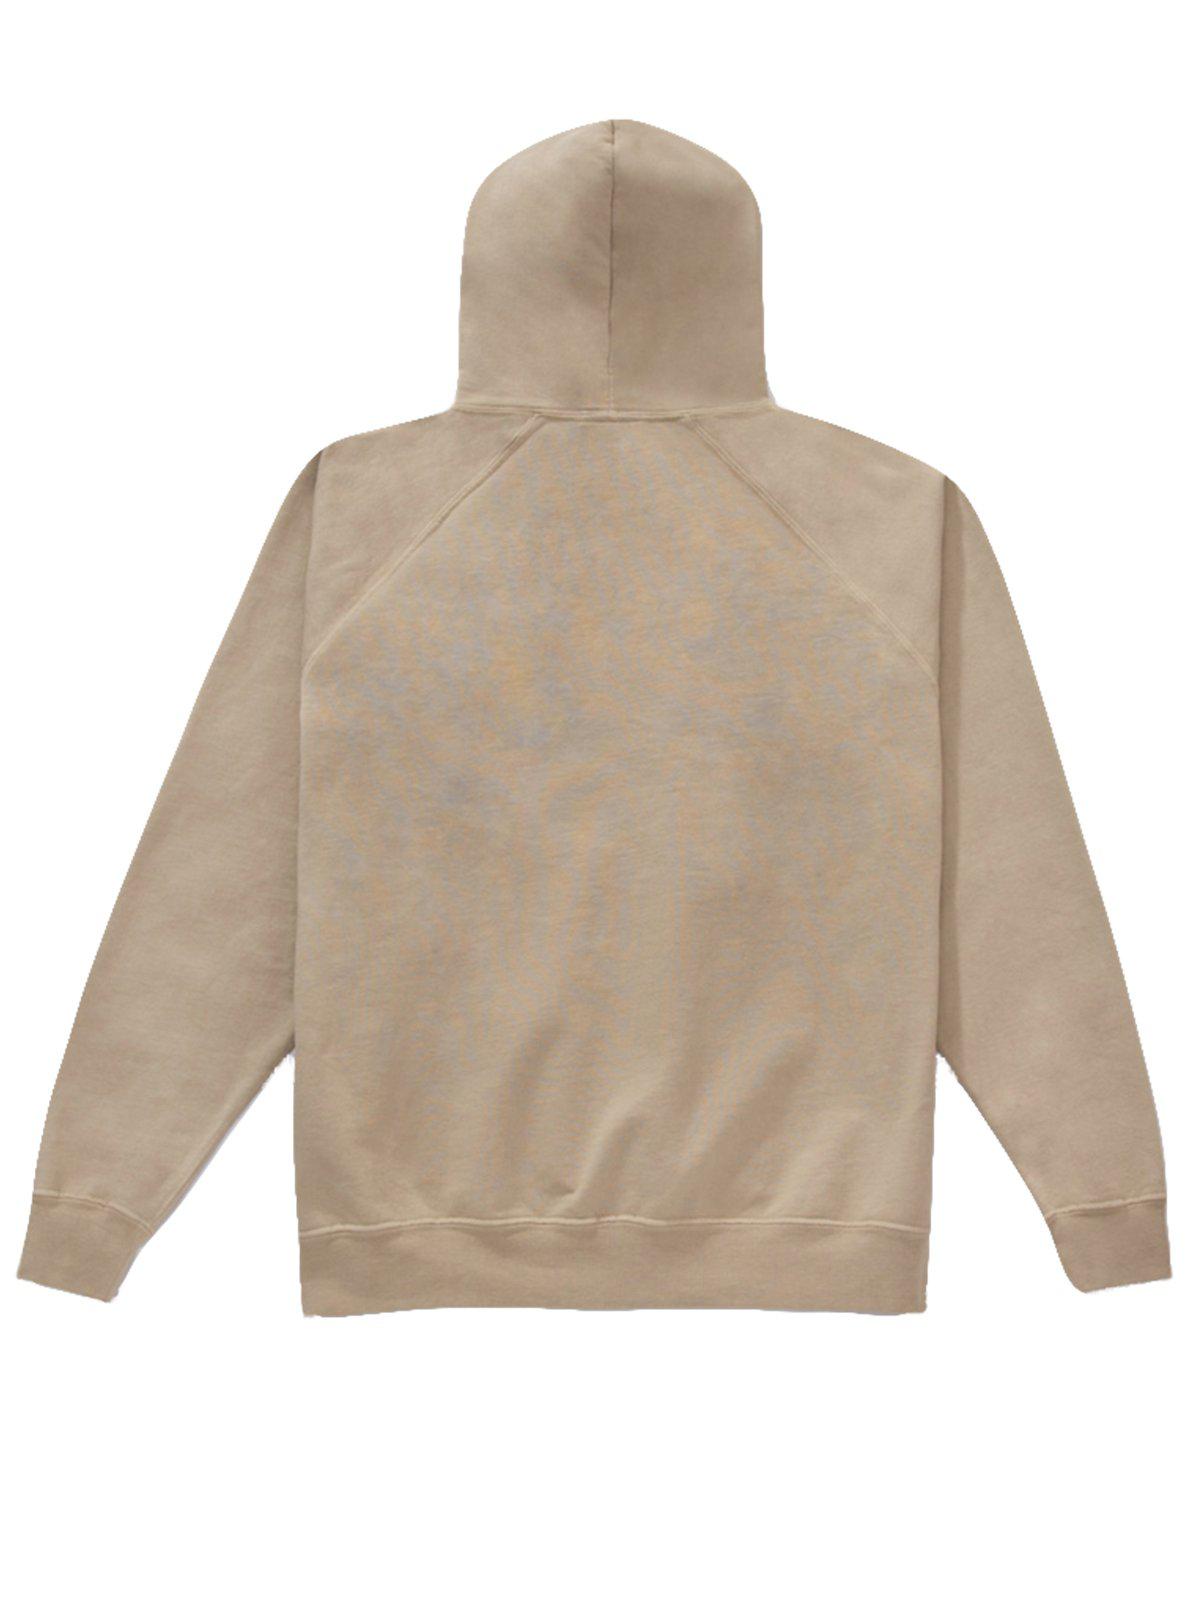 Lady White Co. Llewyn Hoodie Beige - MORE by Morello Indonesia